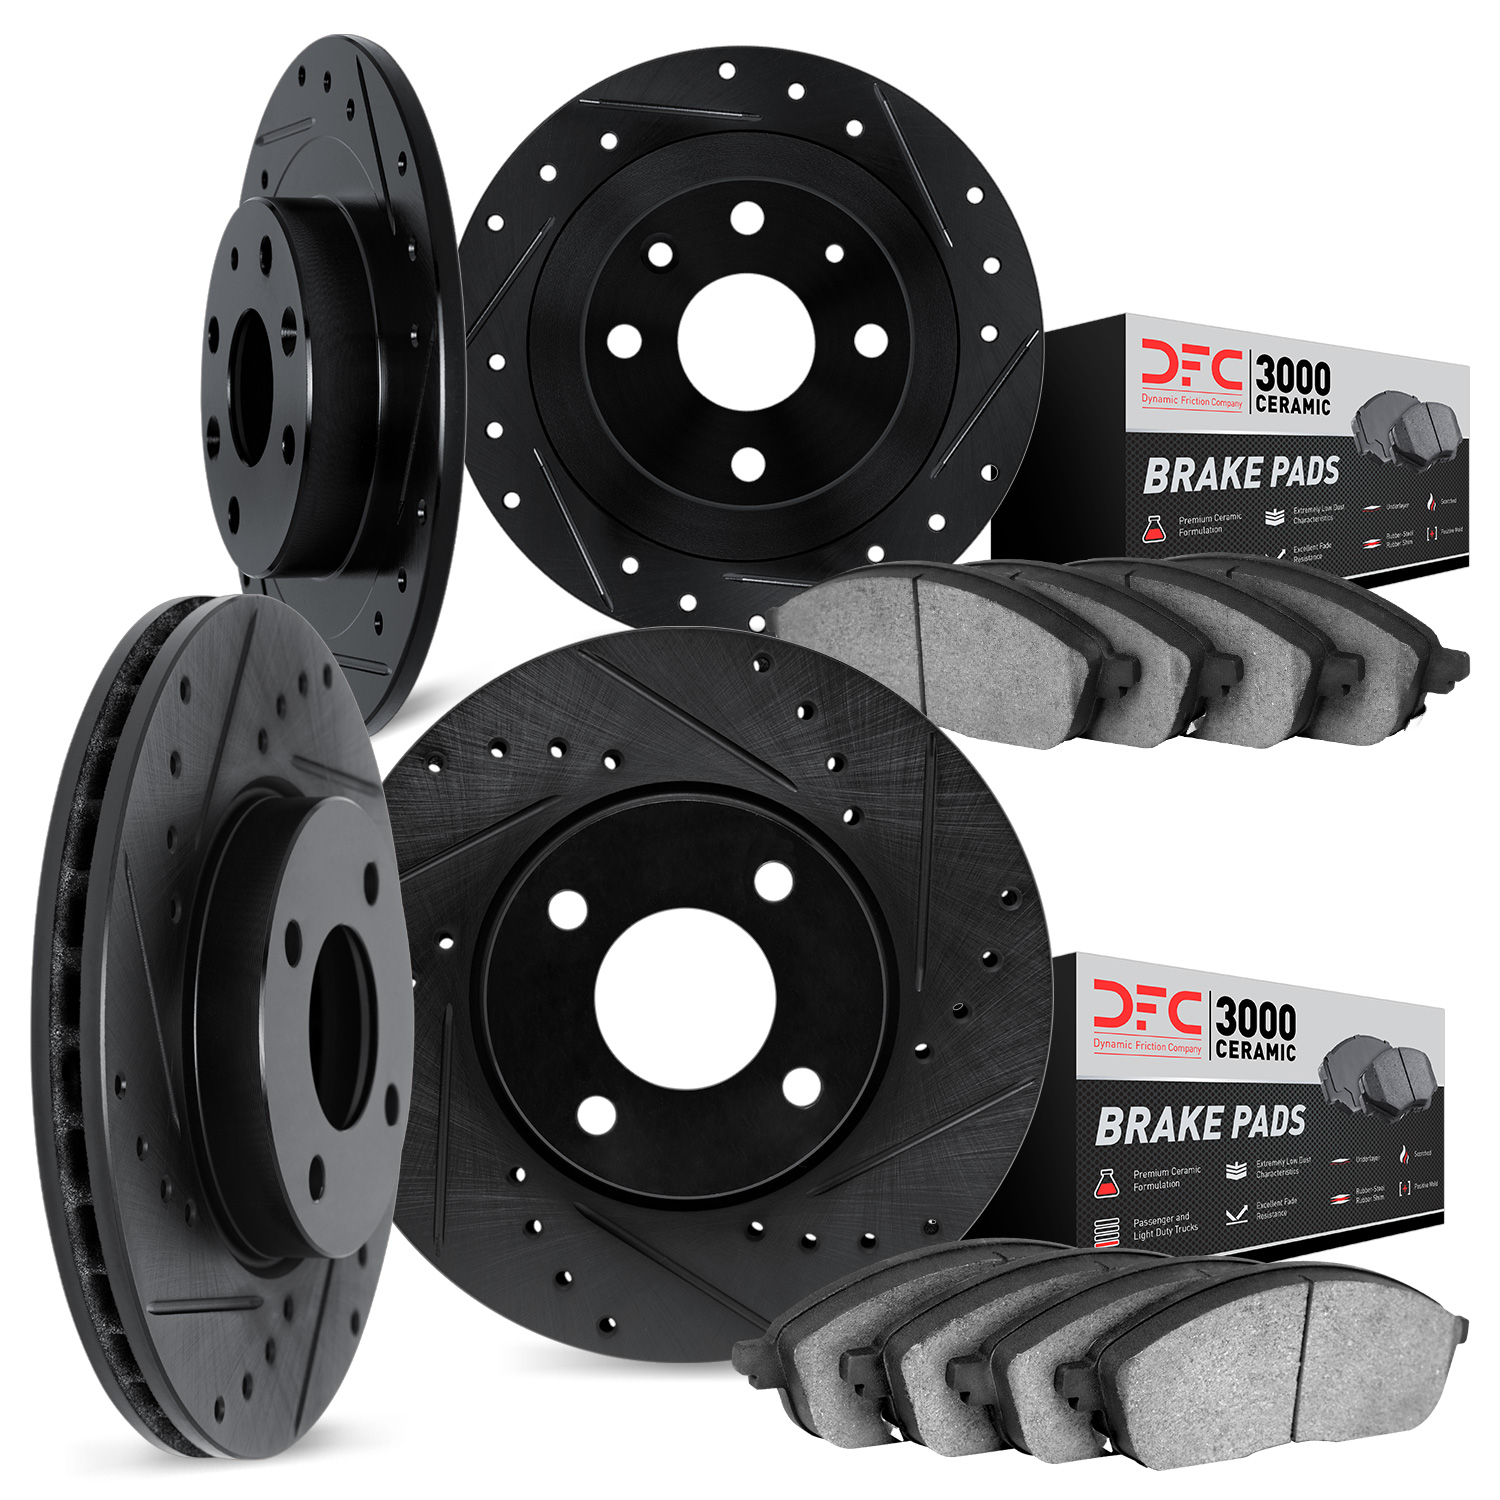 8304-53001 Drilled/Slotted Brake Rotors with 3000-Series Ceramic Brake Pads Kit [Black], 1991-1998 GM, Position: Front and Rear